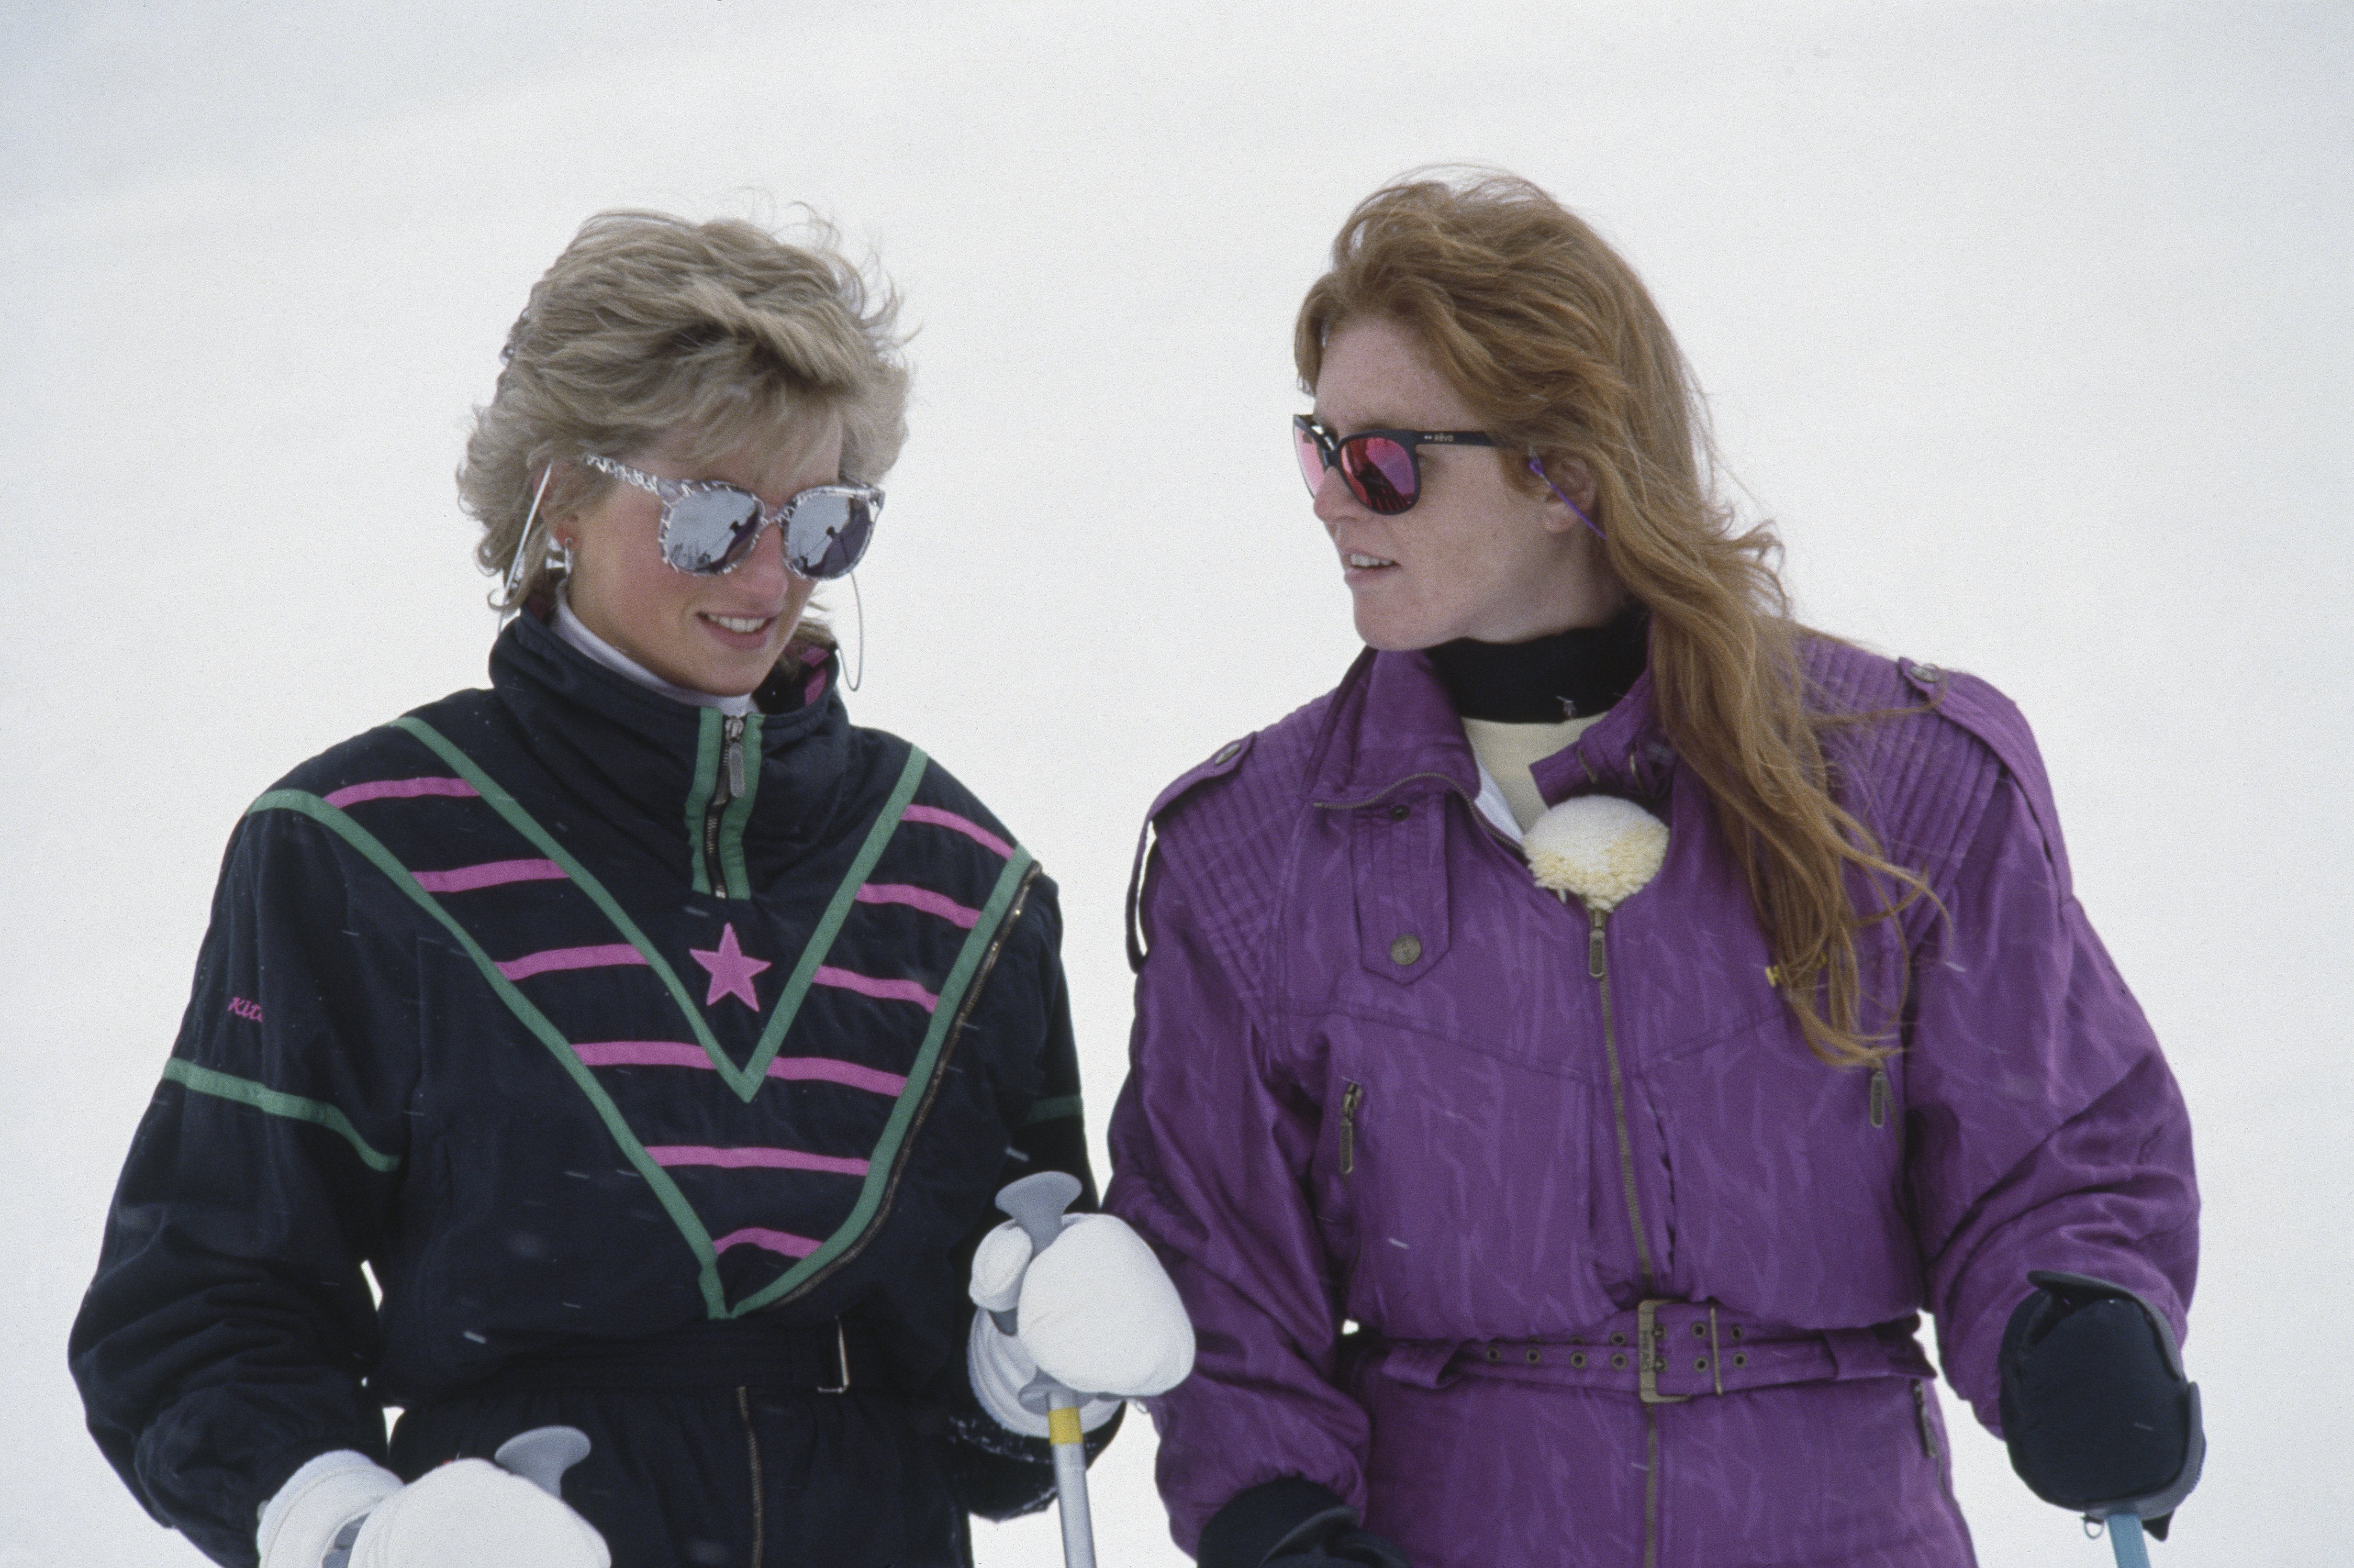 Princess Diana with the Duchess of York, Sarah Ferguson during a skiing holiday in Klosters, Switzerland, on March 9, 1988. / Source: Getty Images